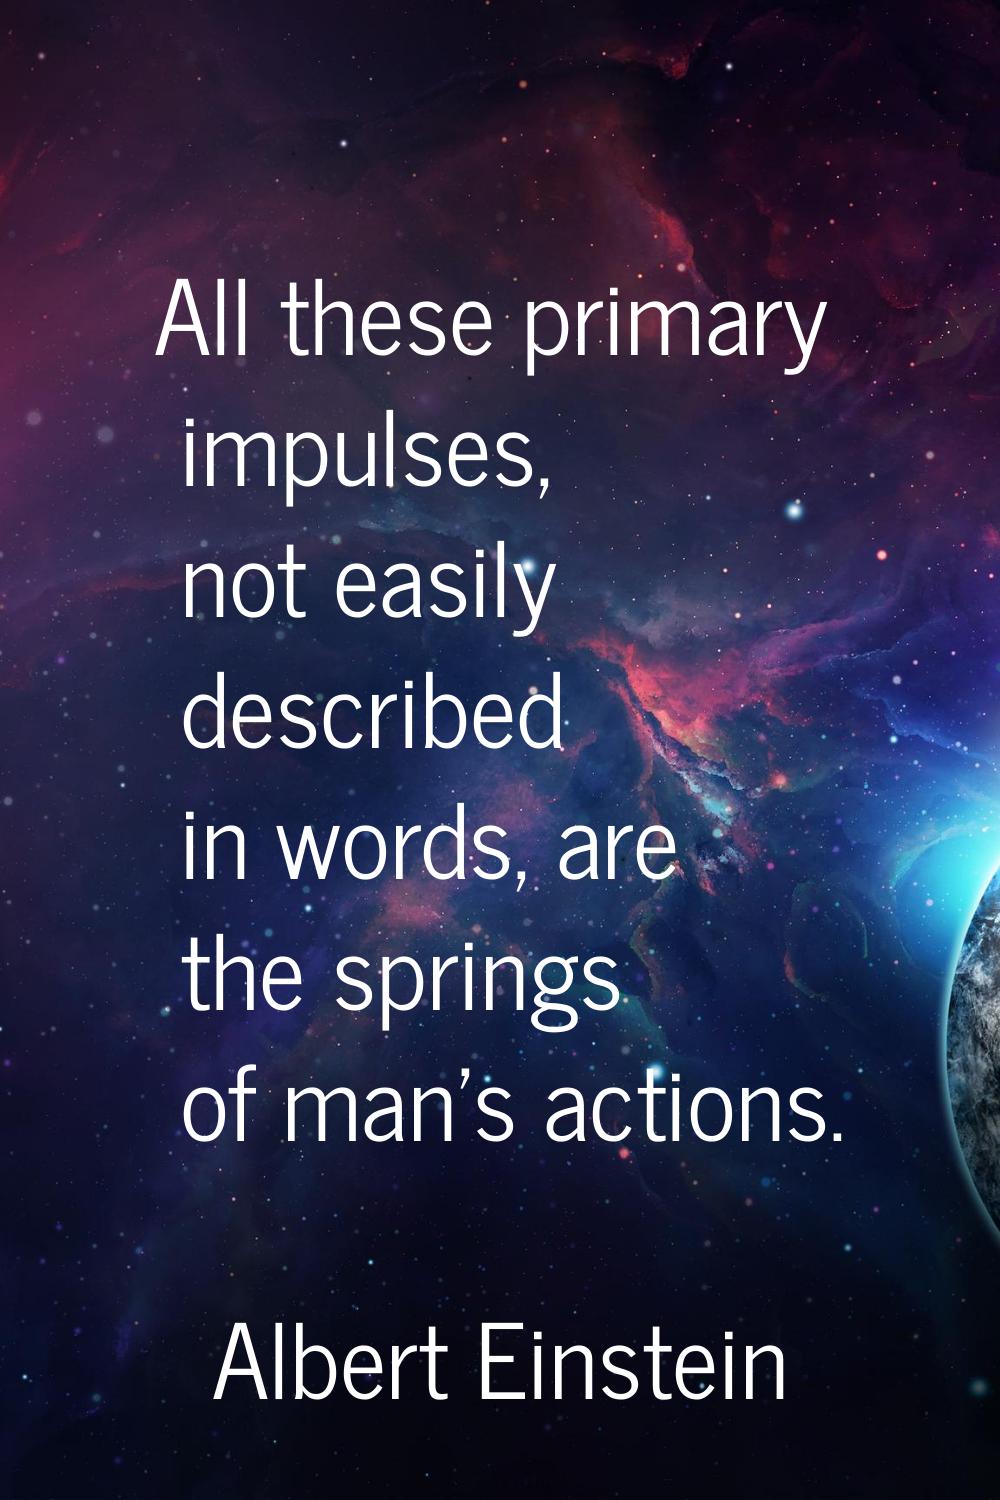 All these primary impulses, not easily described in words, are the springs of man's actions.